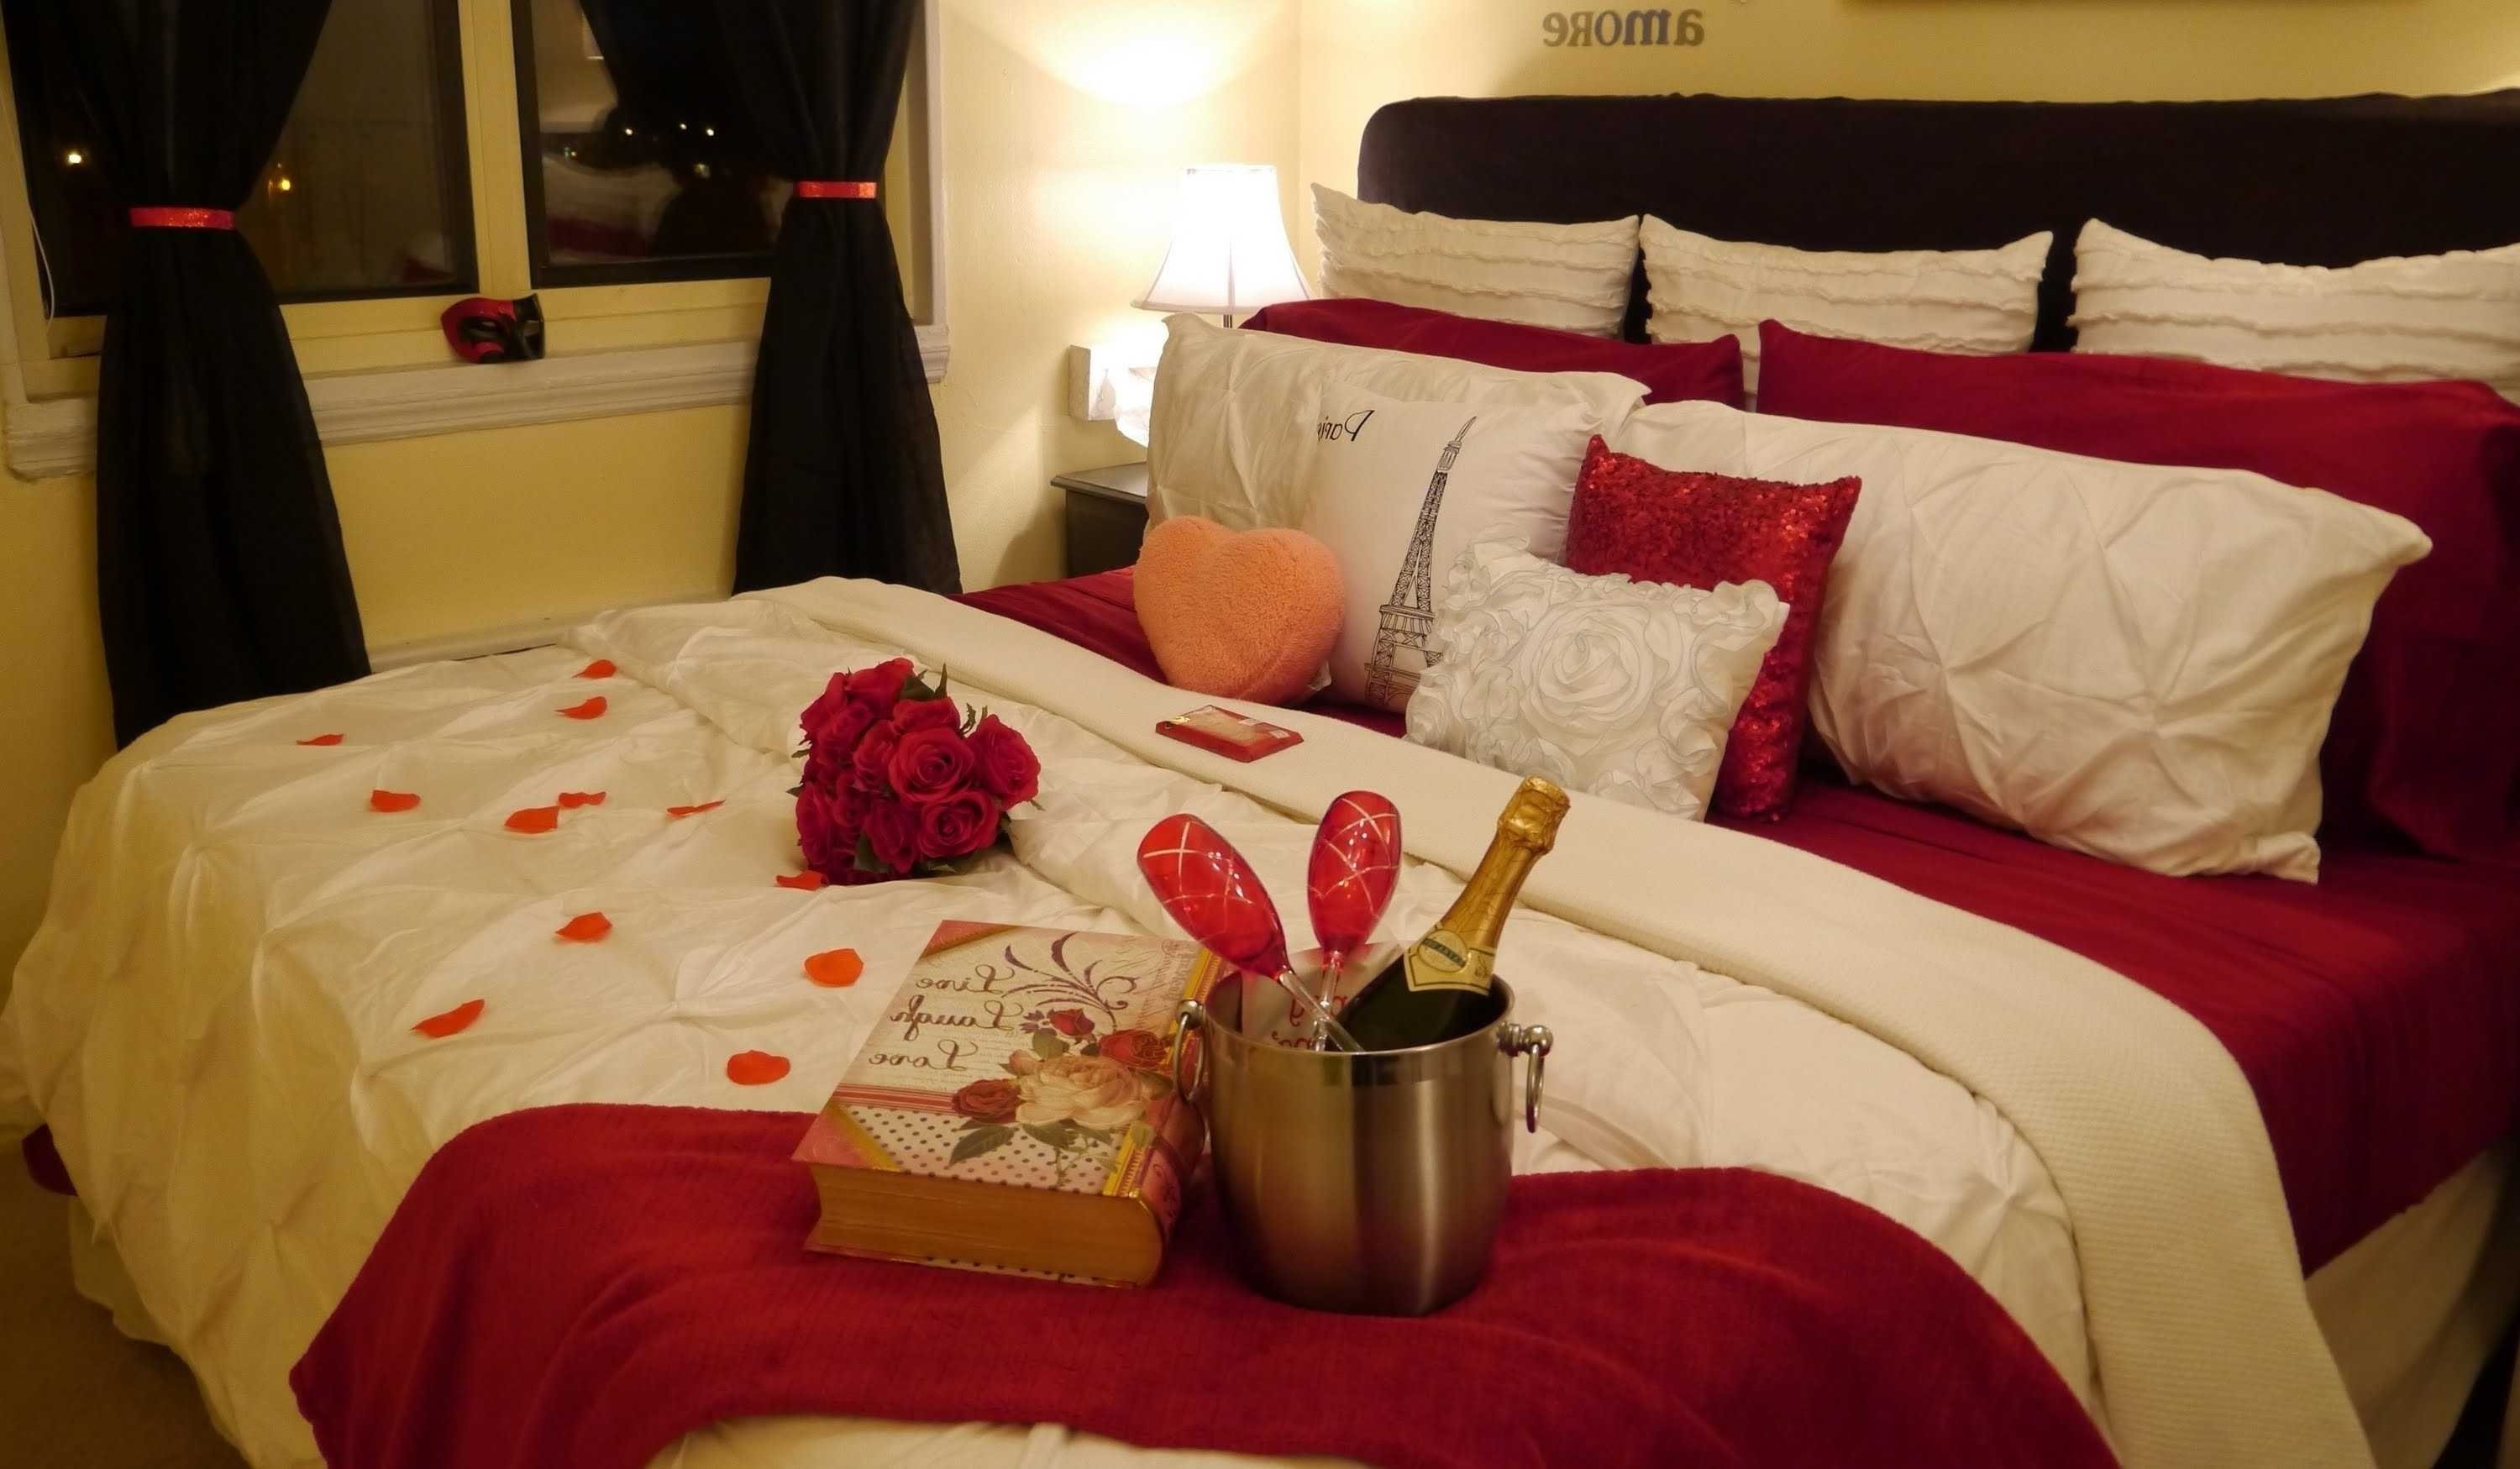 10 Lovable Romantic Hotel Ideas For Him awesome decorate a romantic bedroom including night dinner ideas for 1 2022